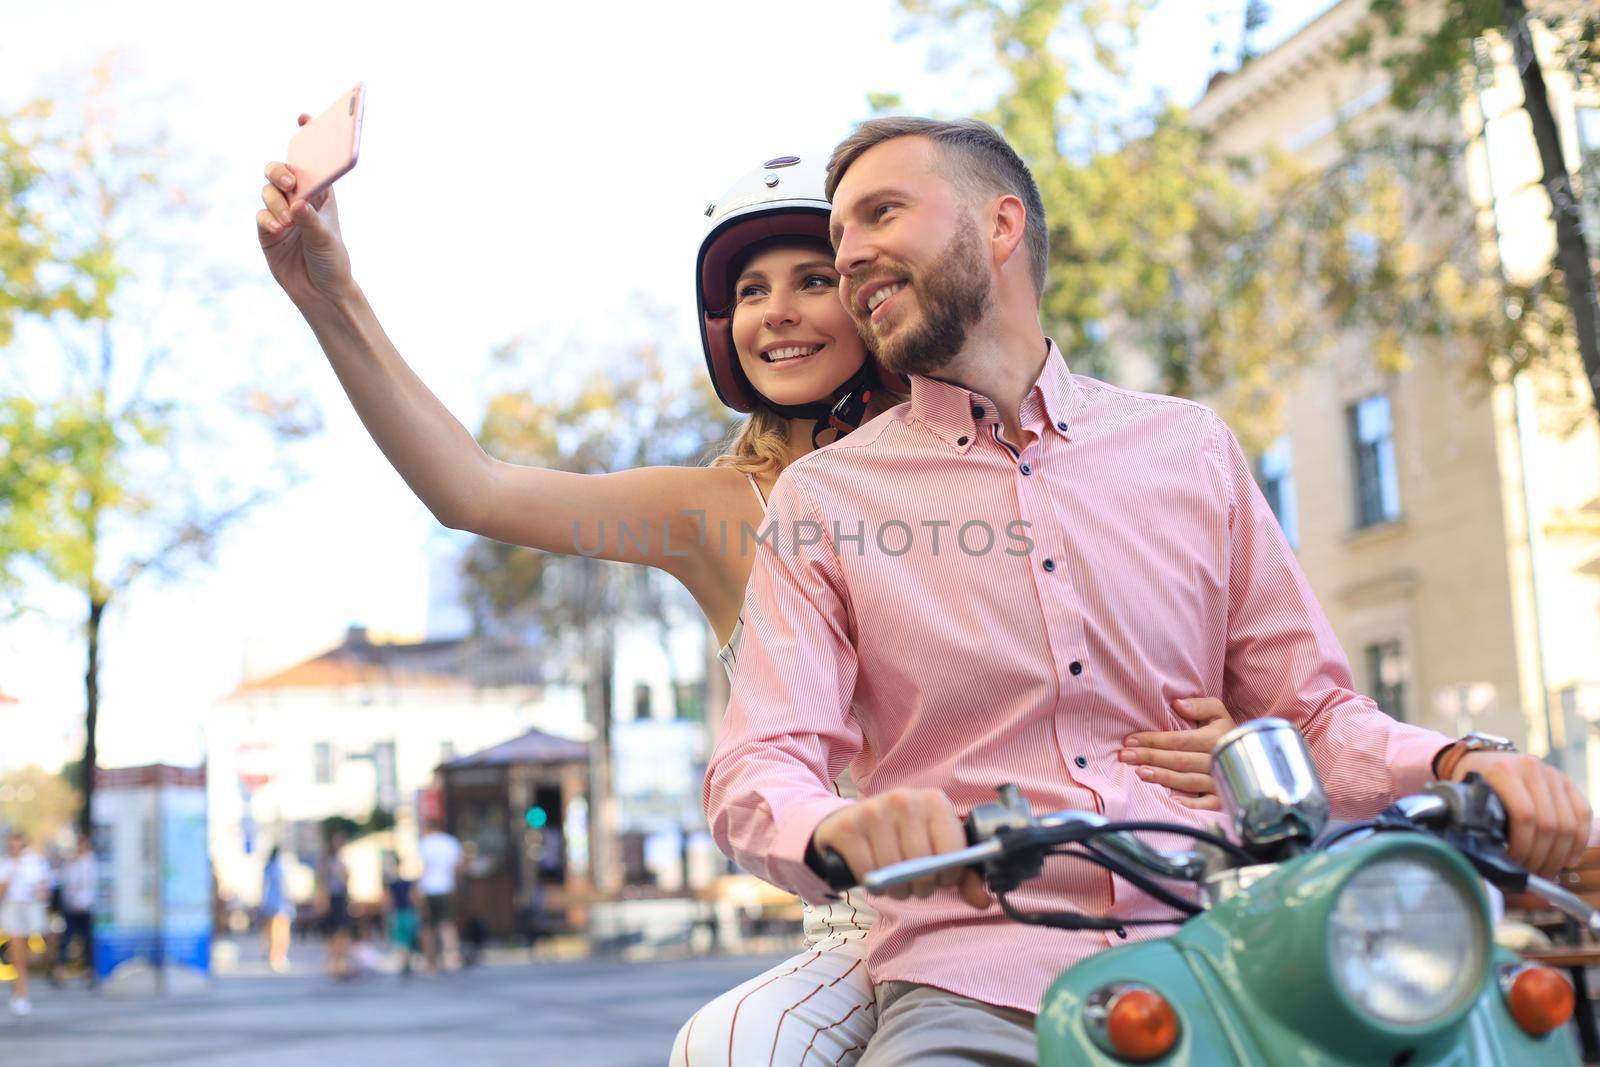 Happy young couple taking selfie on smartphone while sitting on scooter outdoors